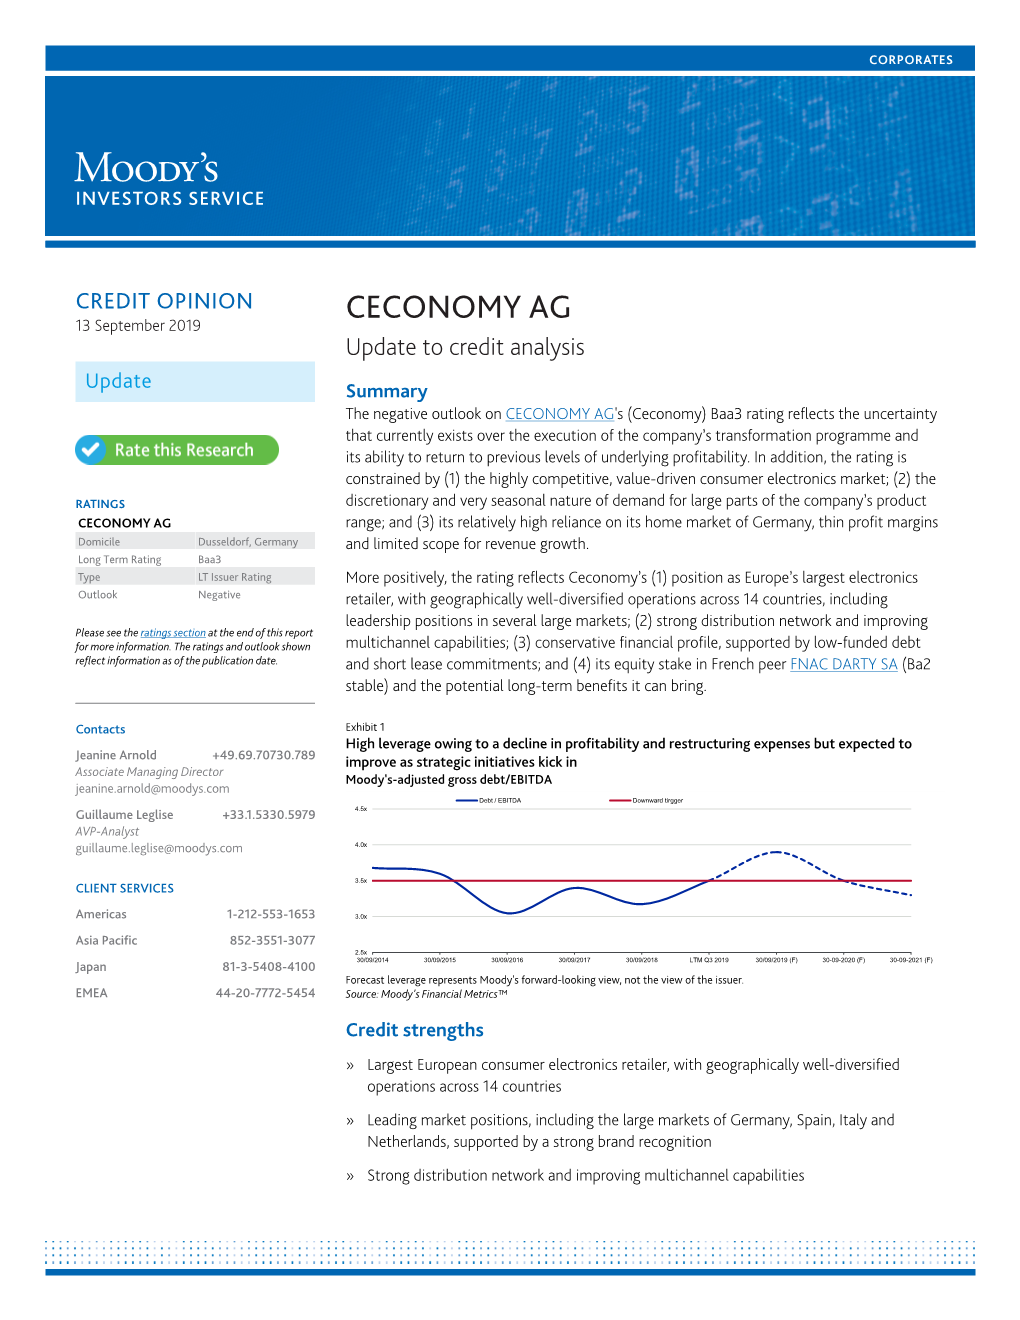 CECONOMY AG 13 September 2019 Update to Credit Analysis